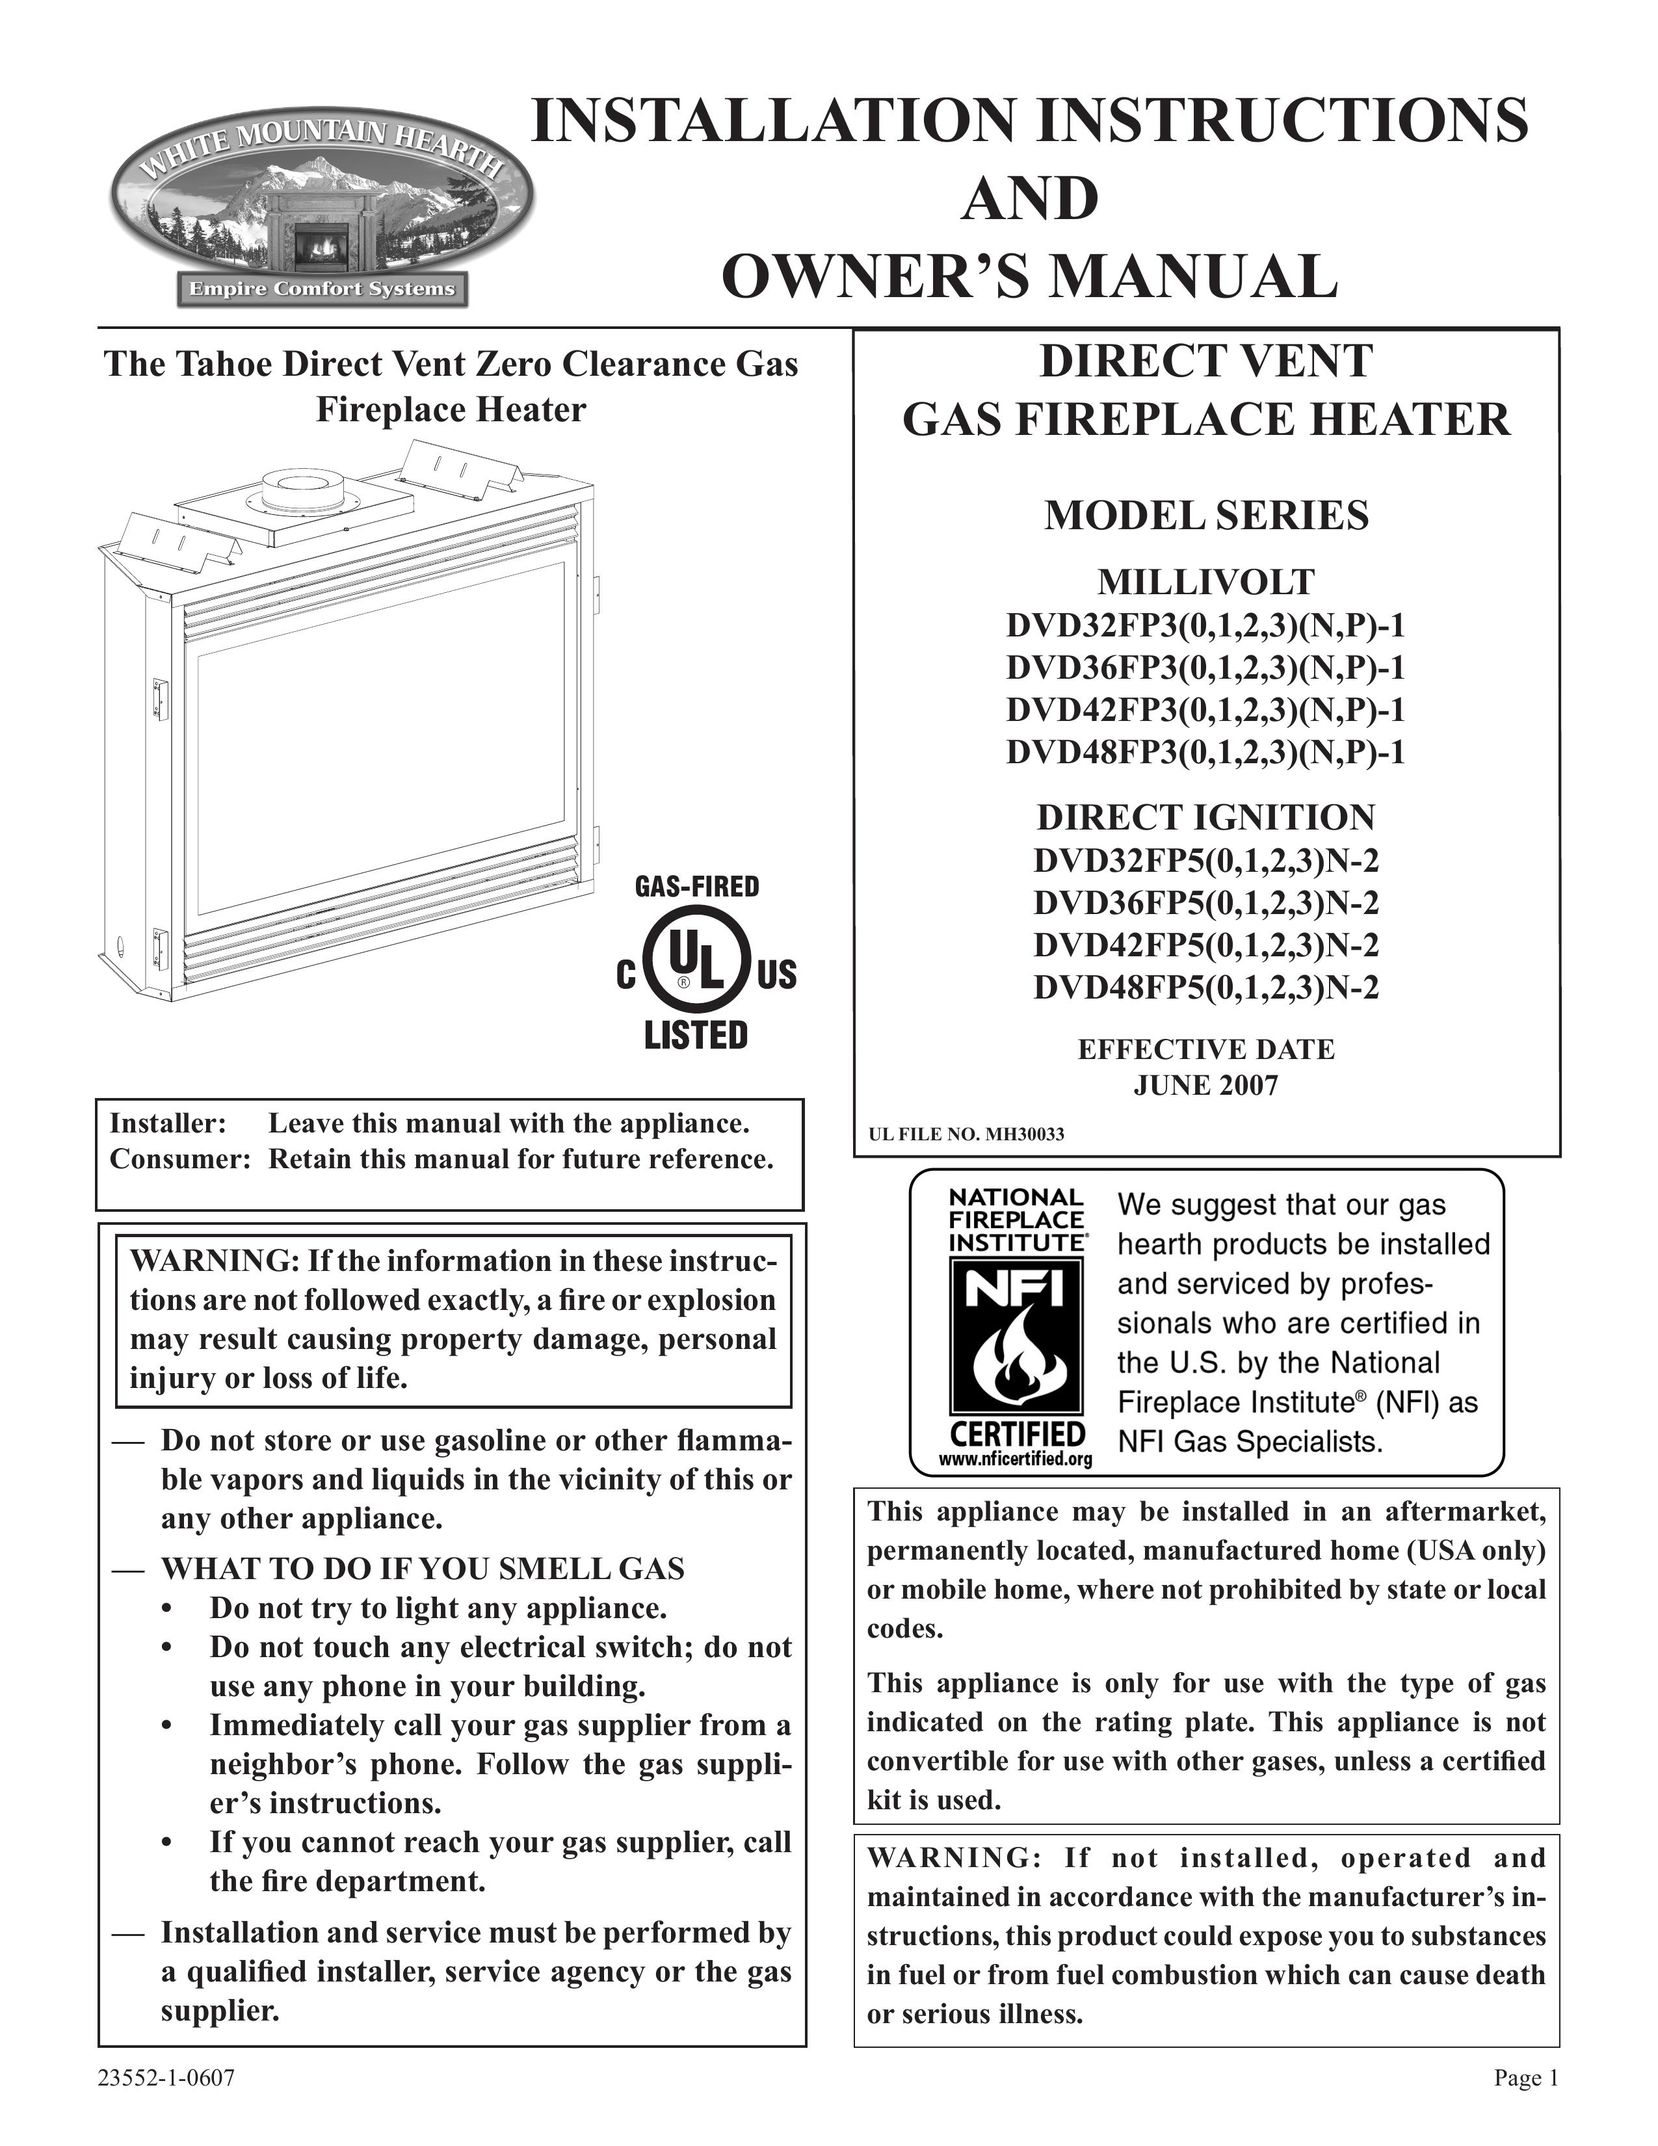 Empire Comfort Systems DVD48FP3 Indoor Fireplace User Manual